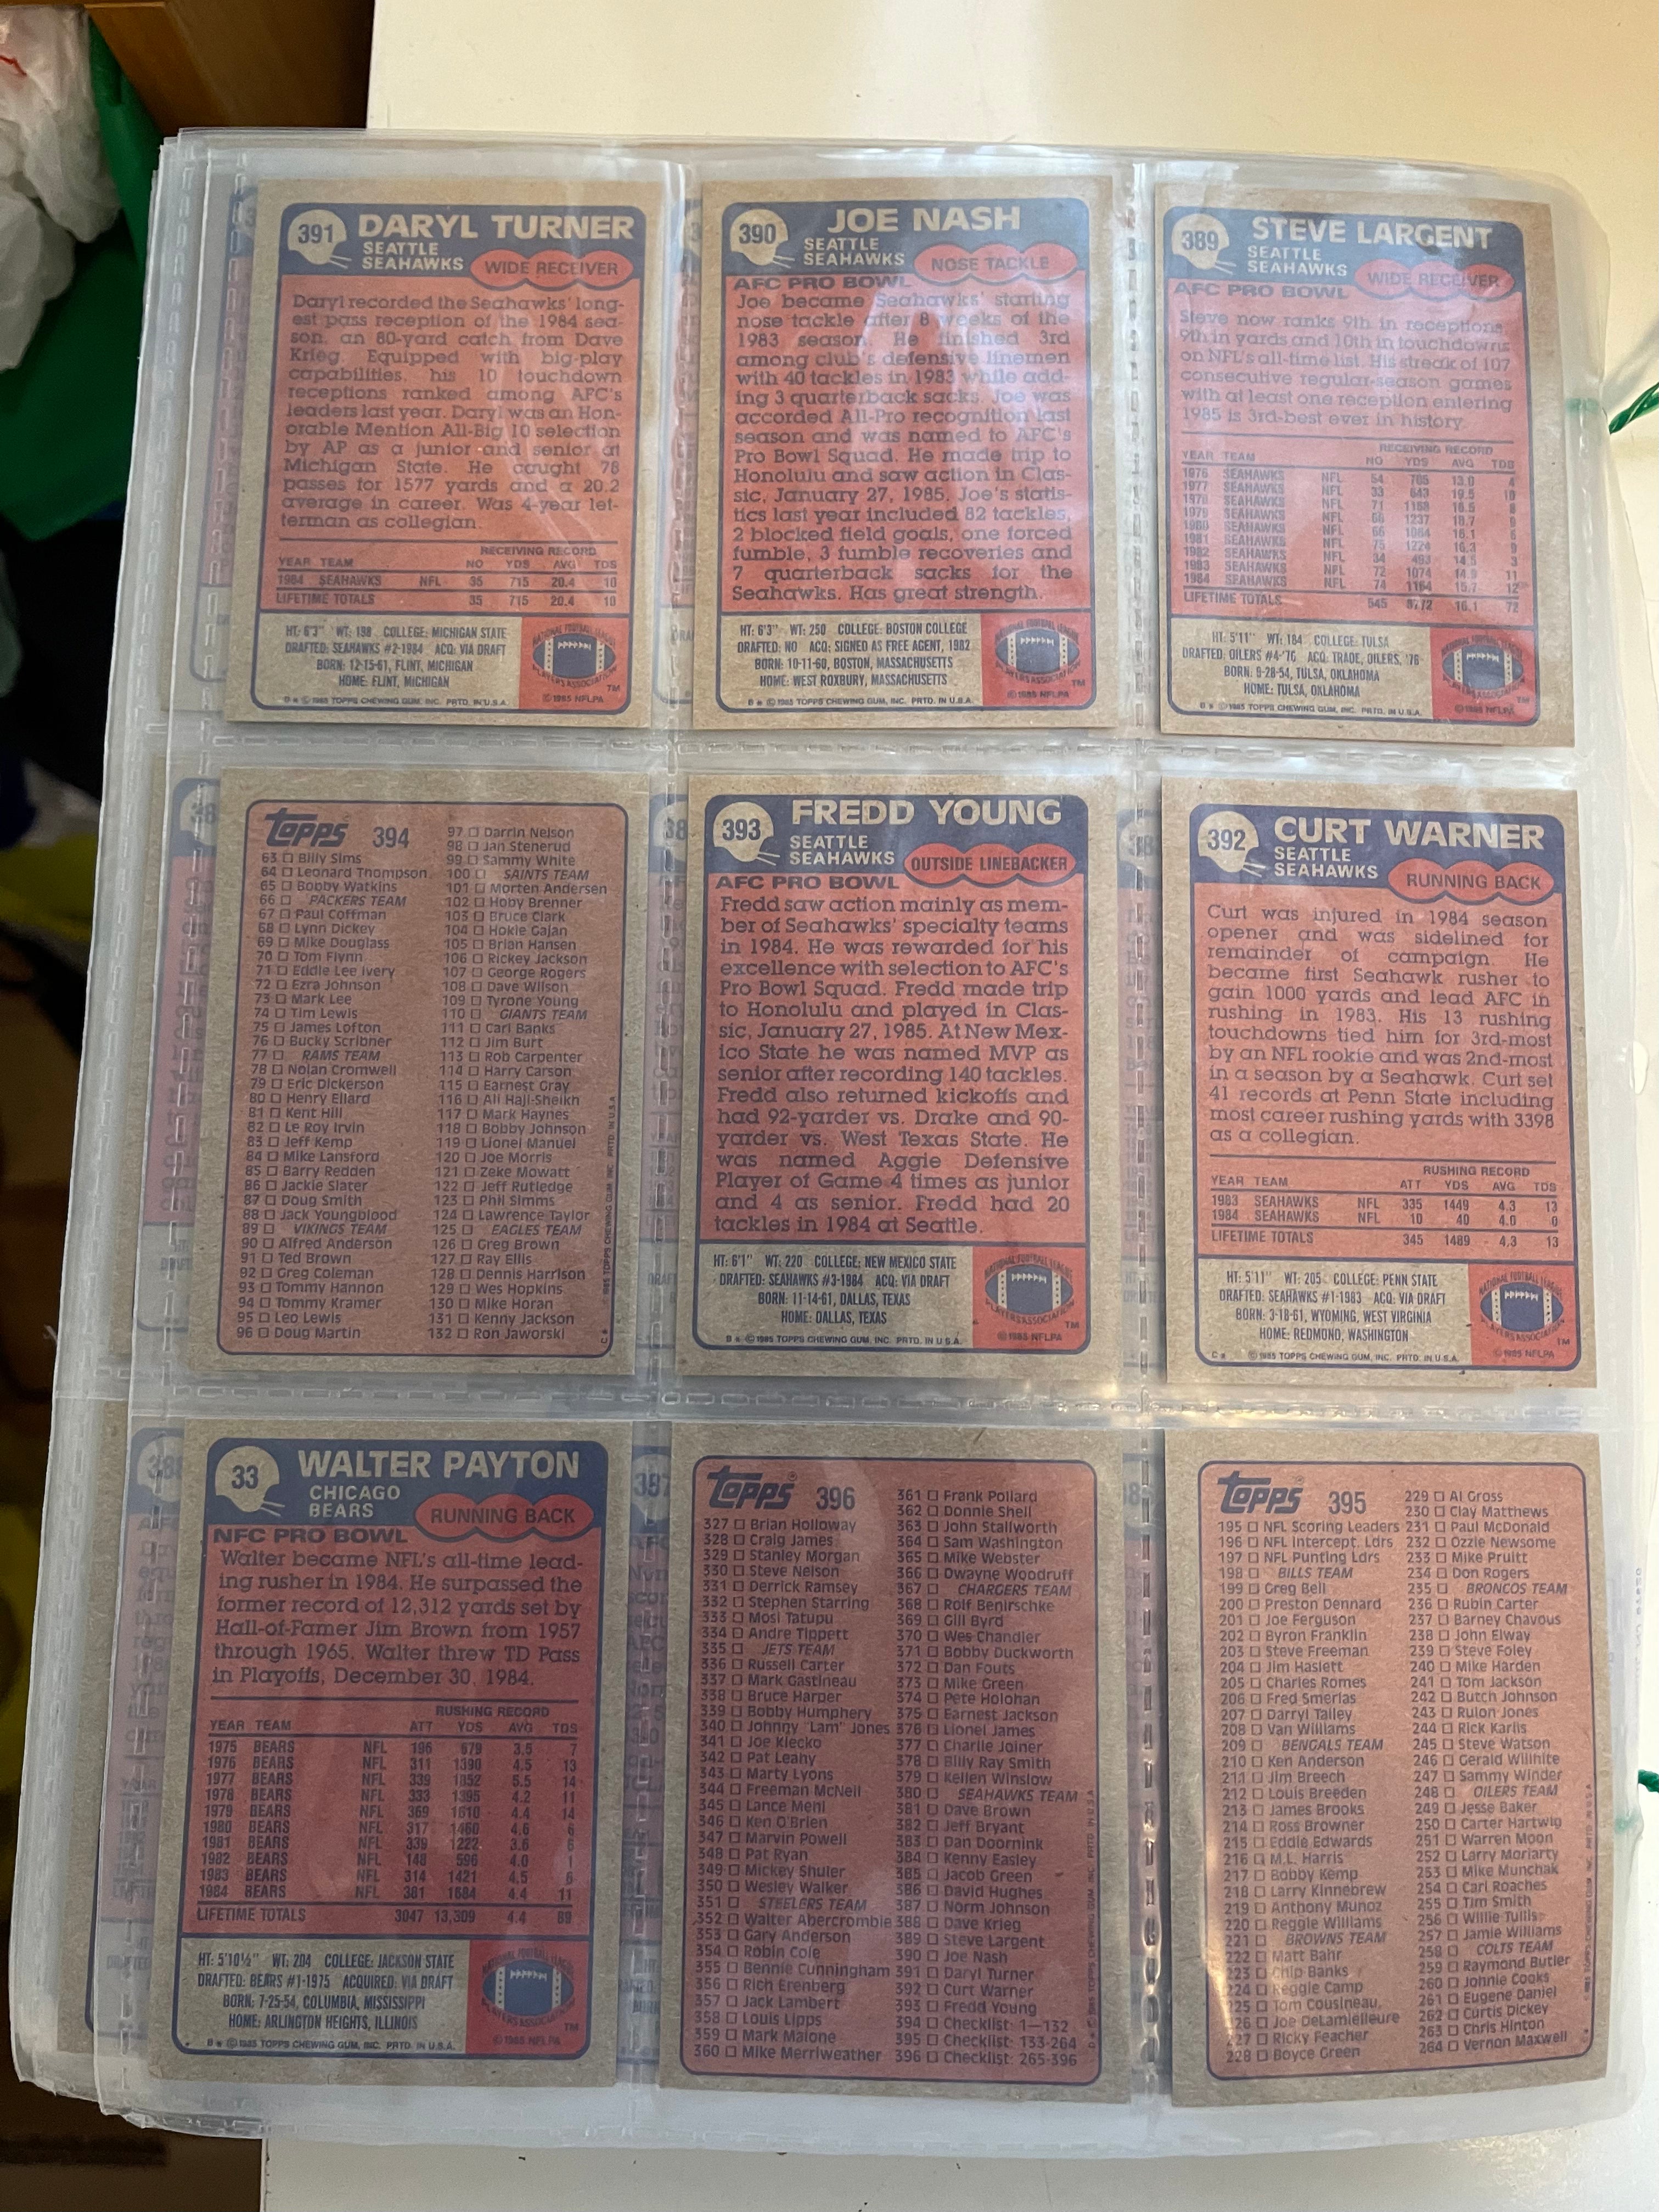 1985 Topps football cards high grade condition set in pages